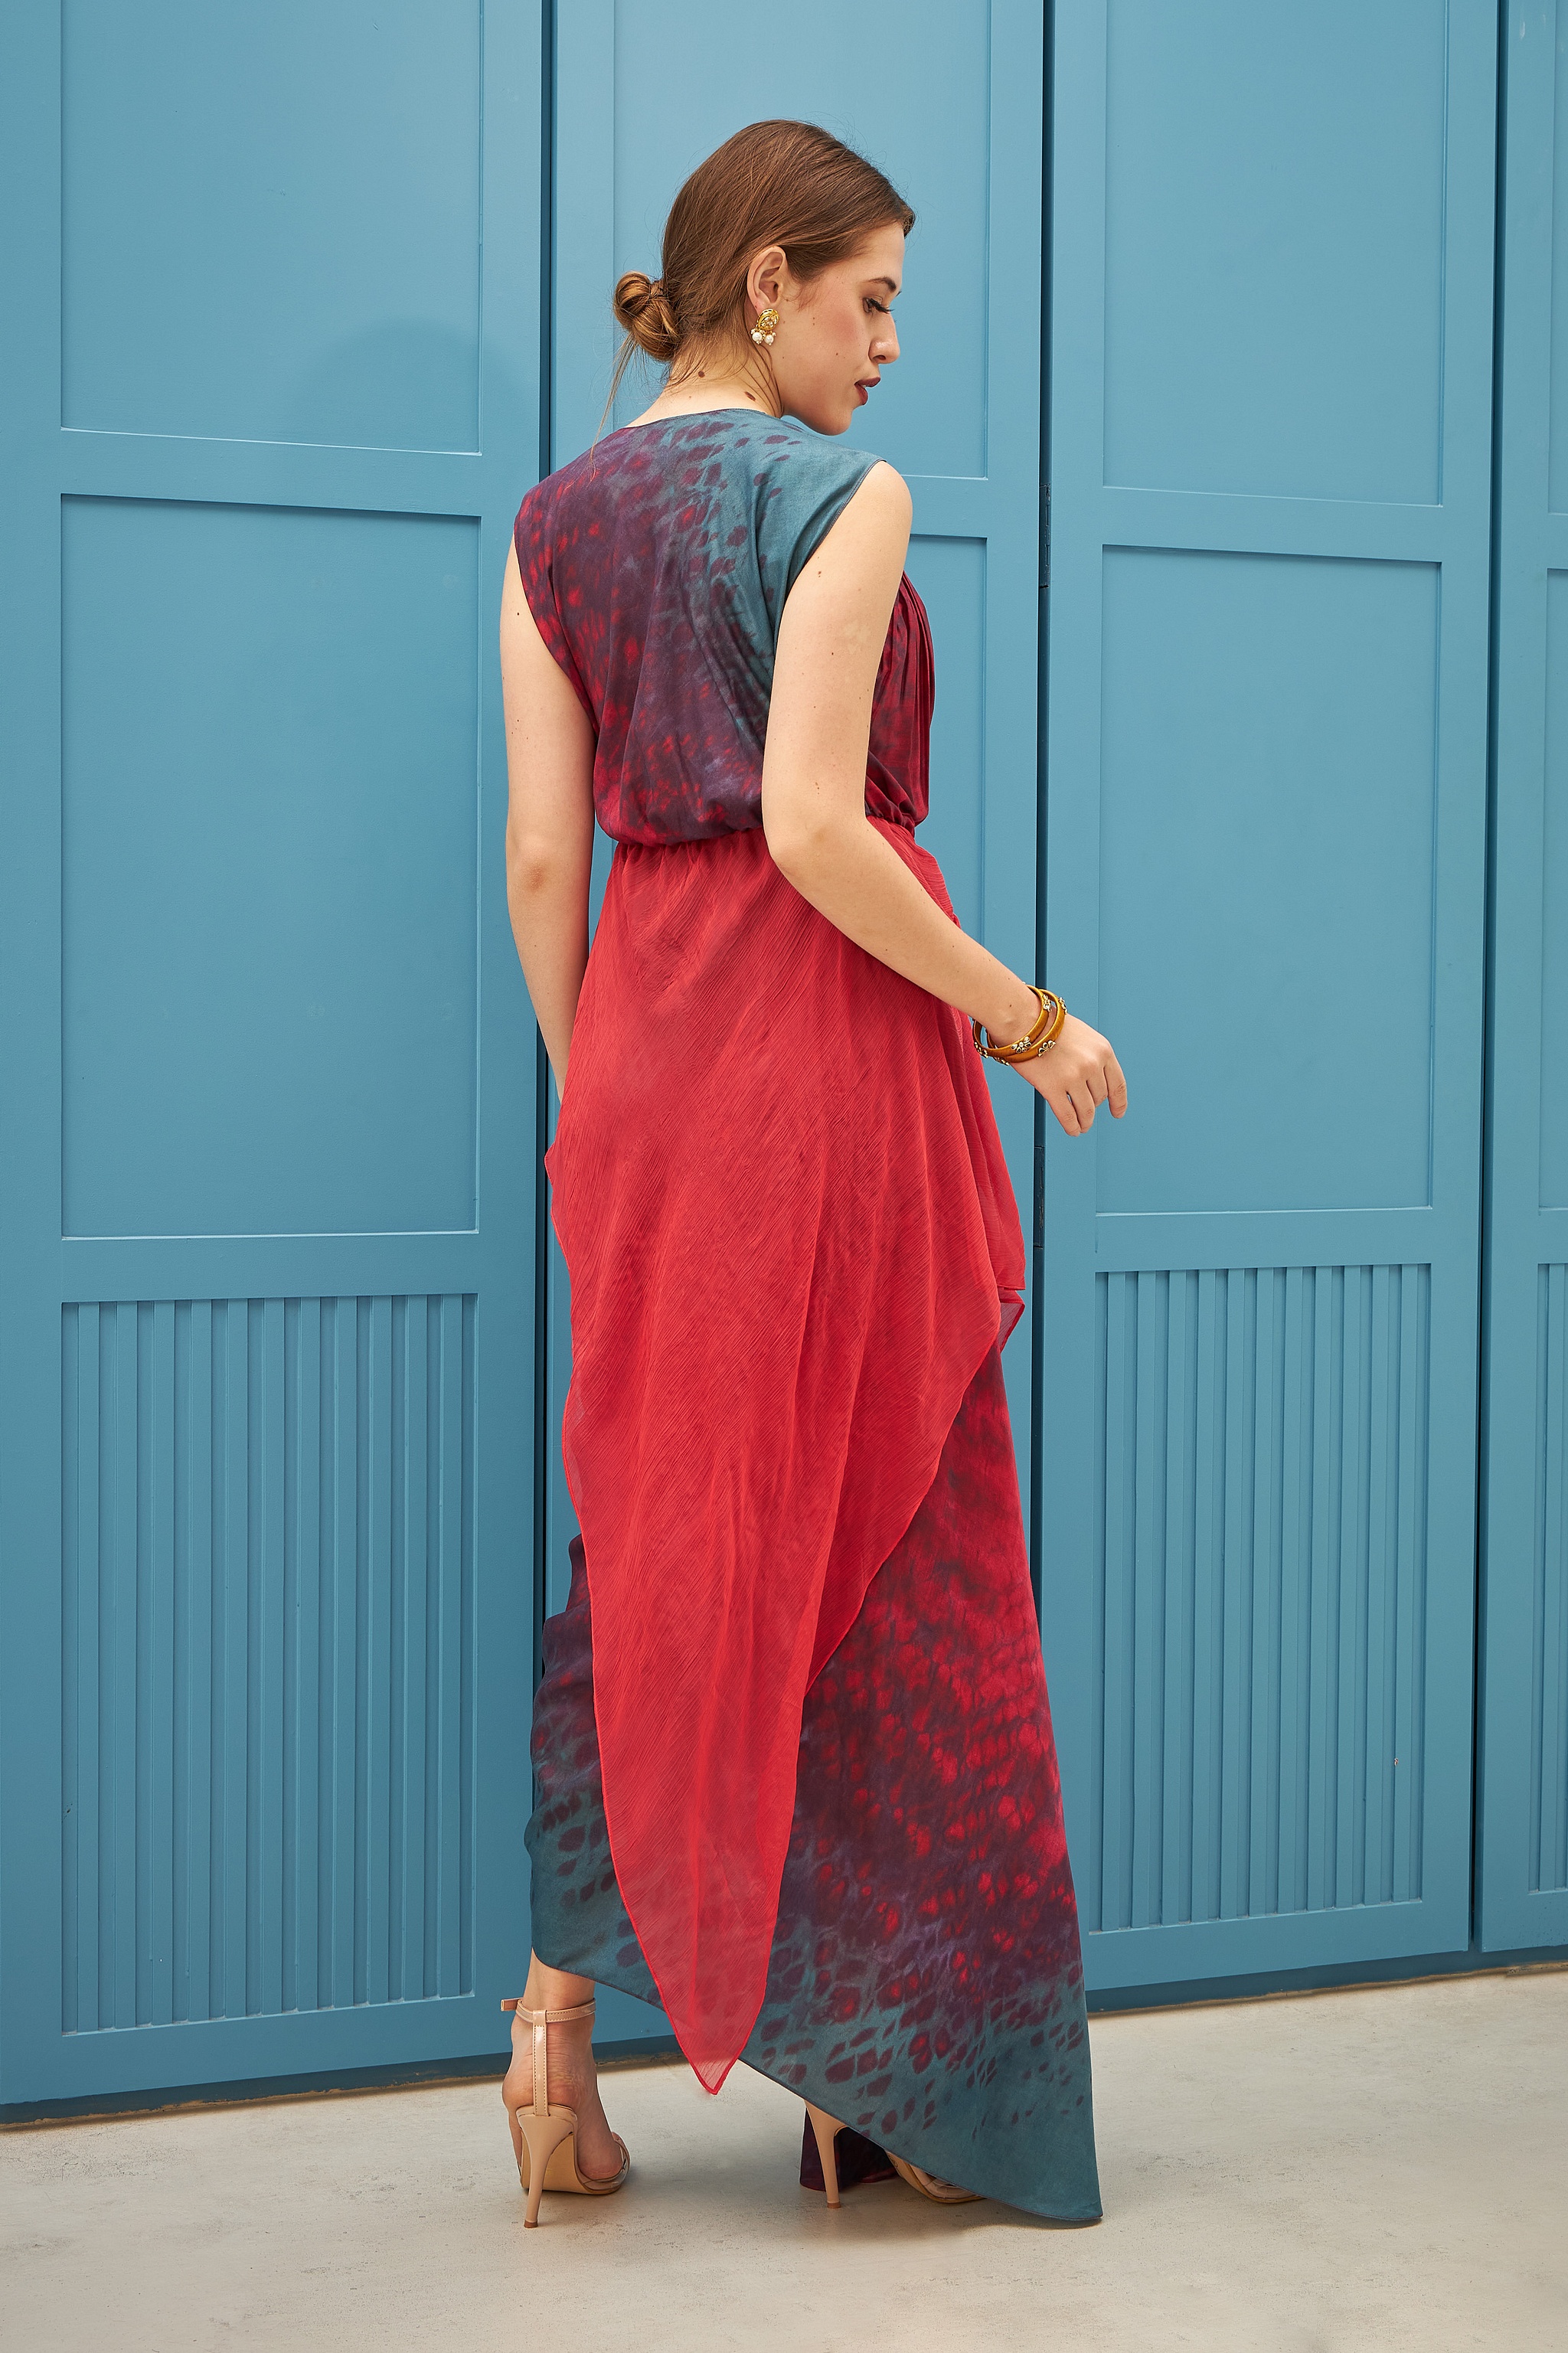 Hand Embellished Indo Western Draped Dress With Cowl Neck